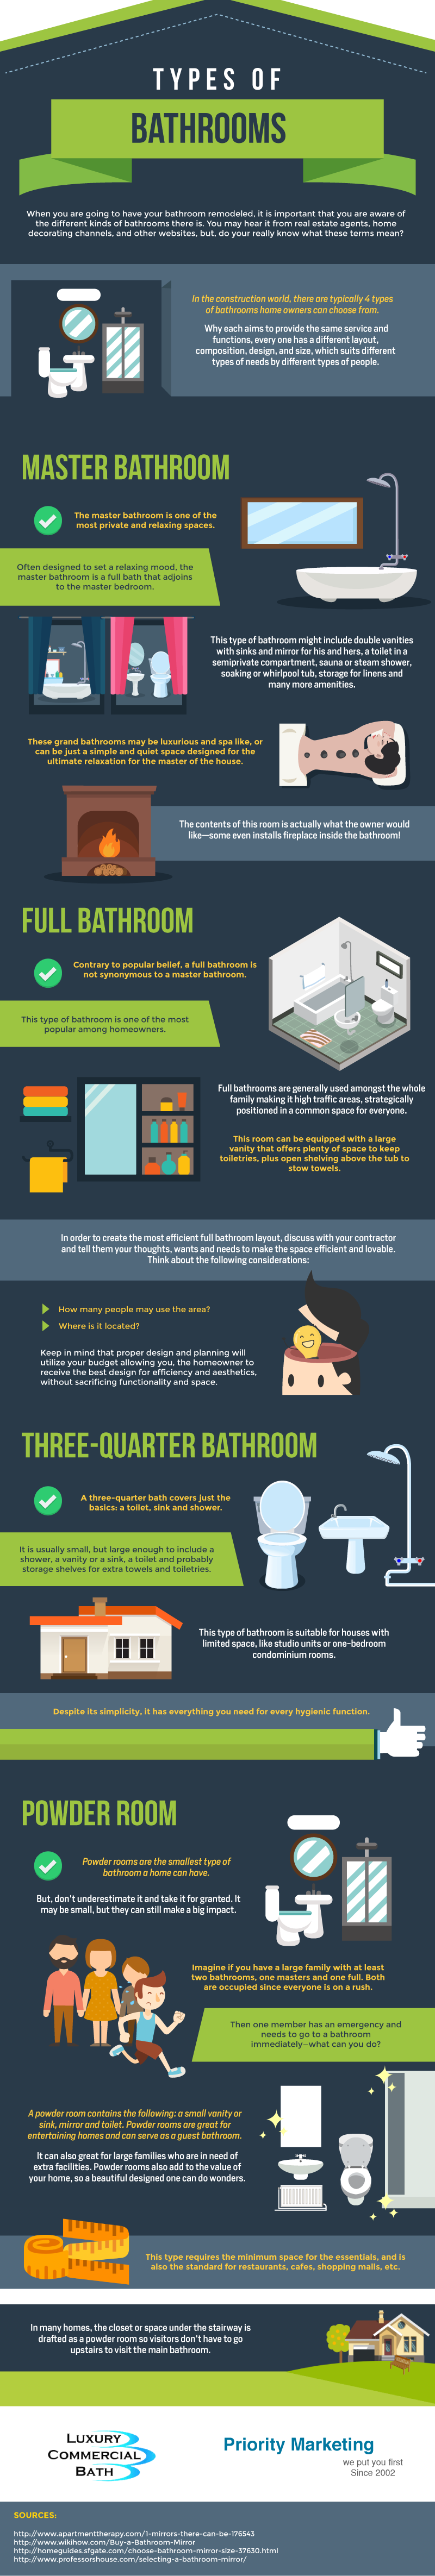 Types of Bathrooms #infographic